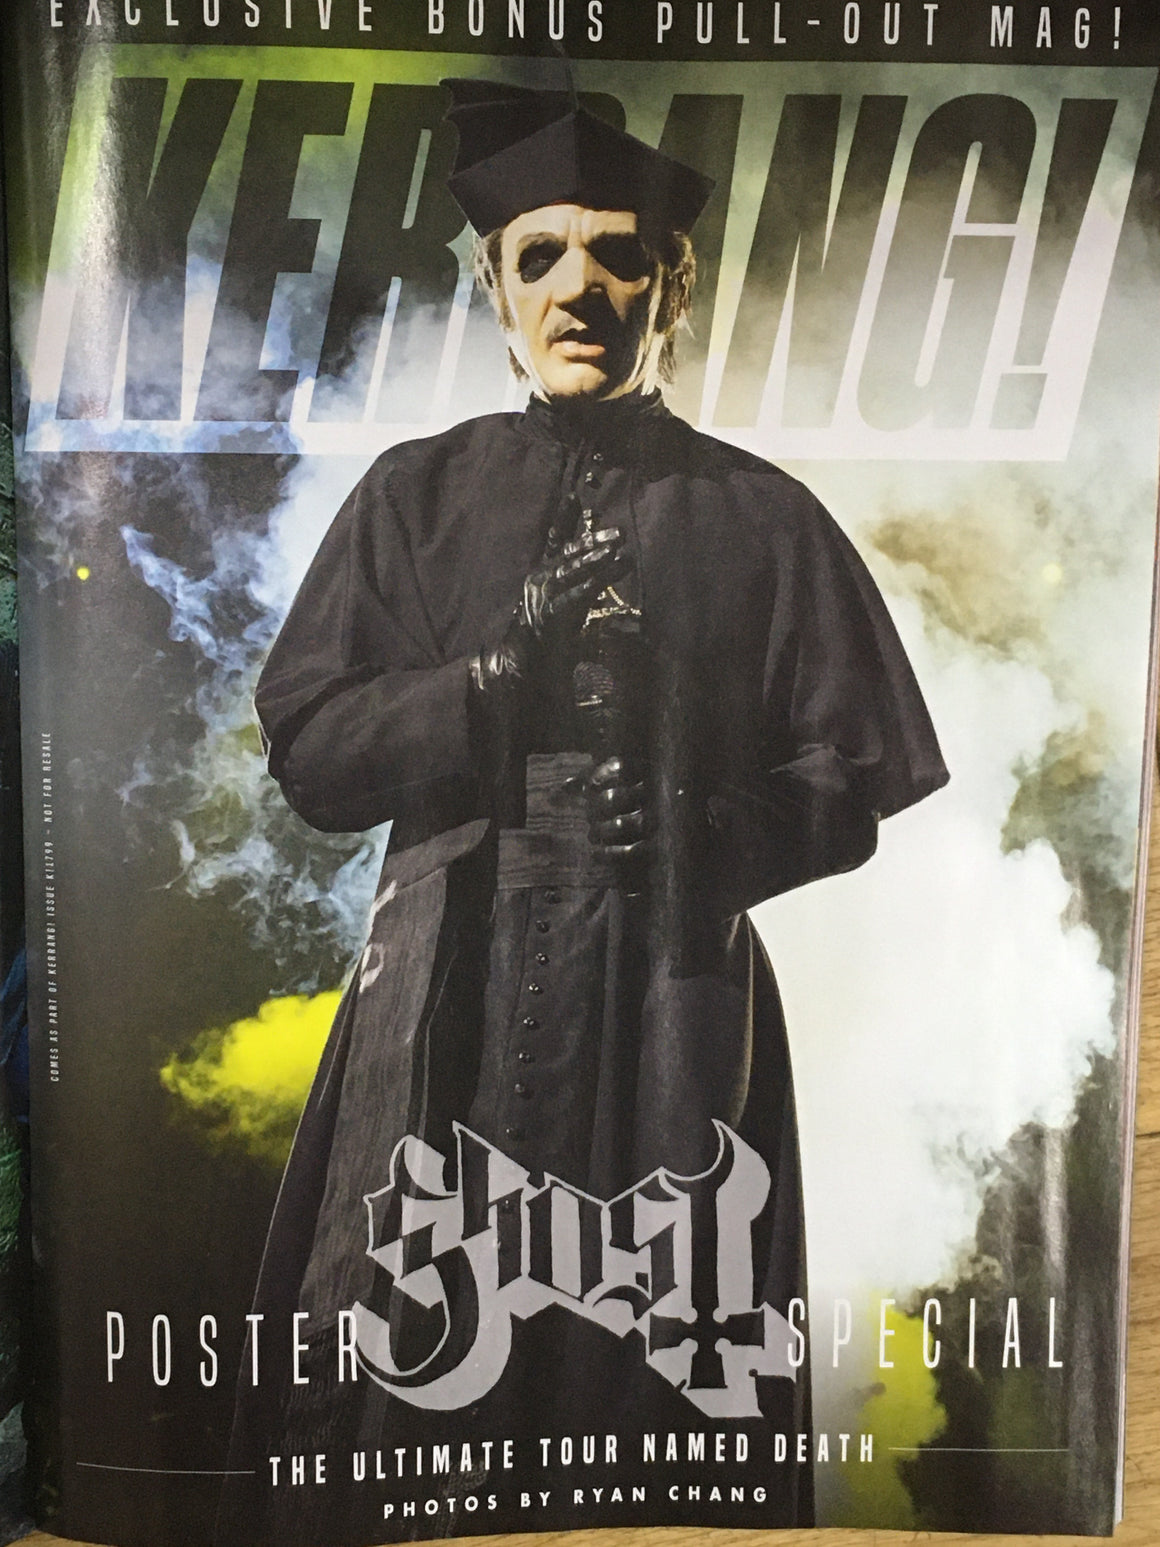 KERRANG! MAGAZINE - November 2019: Ghost Special Pull Out Magazine!